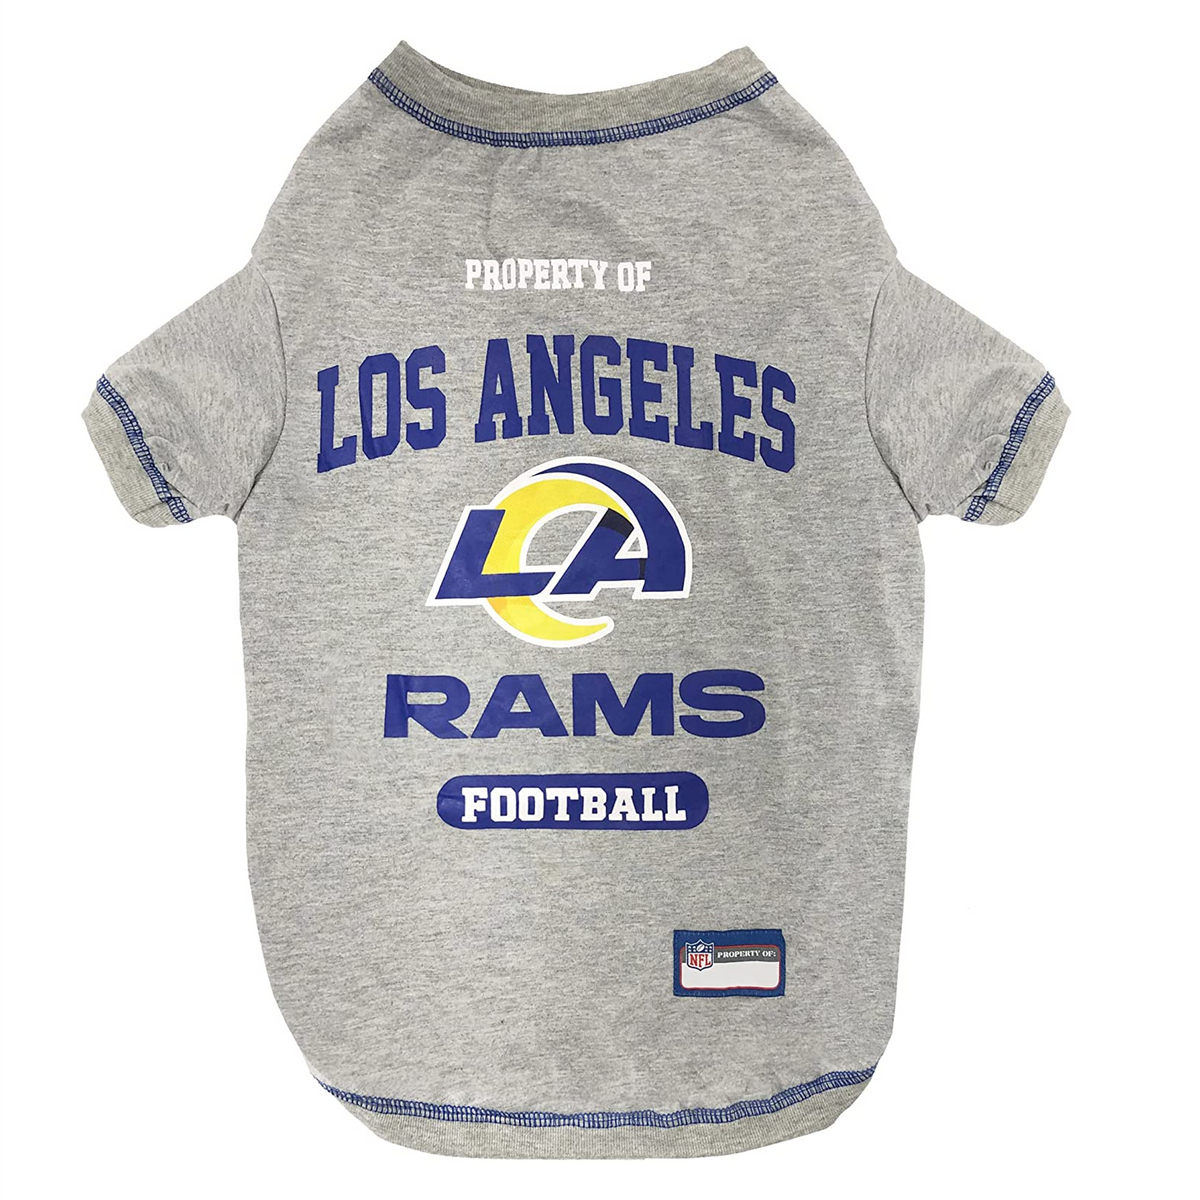 Los Angeles Rams Athletics Tee Shirt - 3 Red Rovers